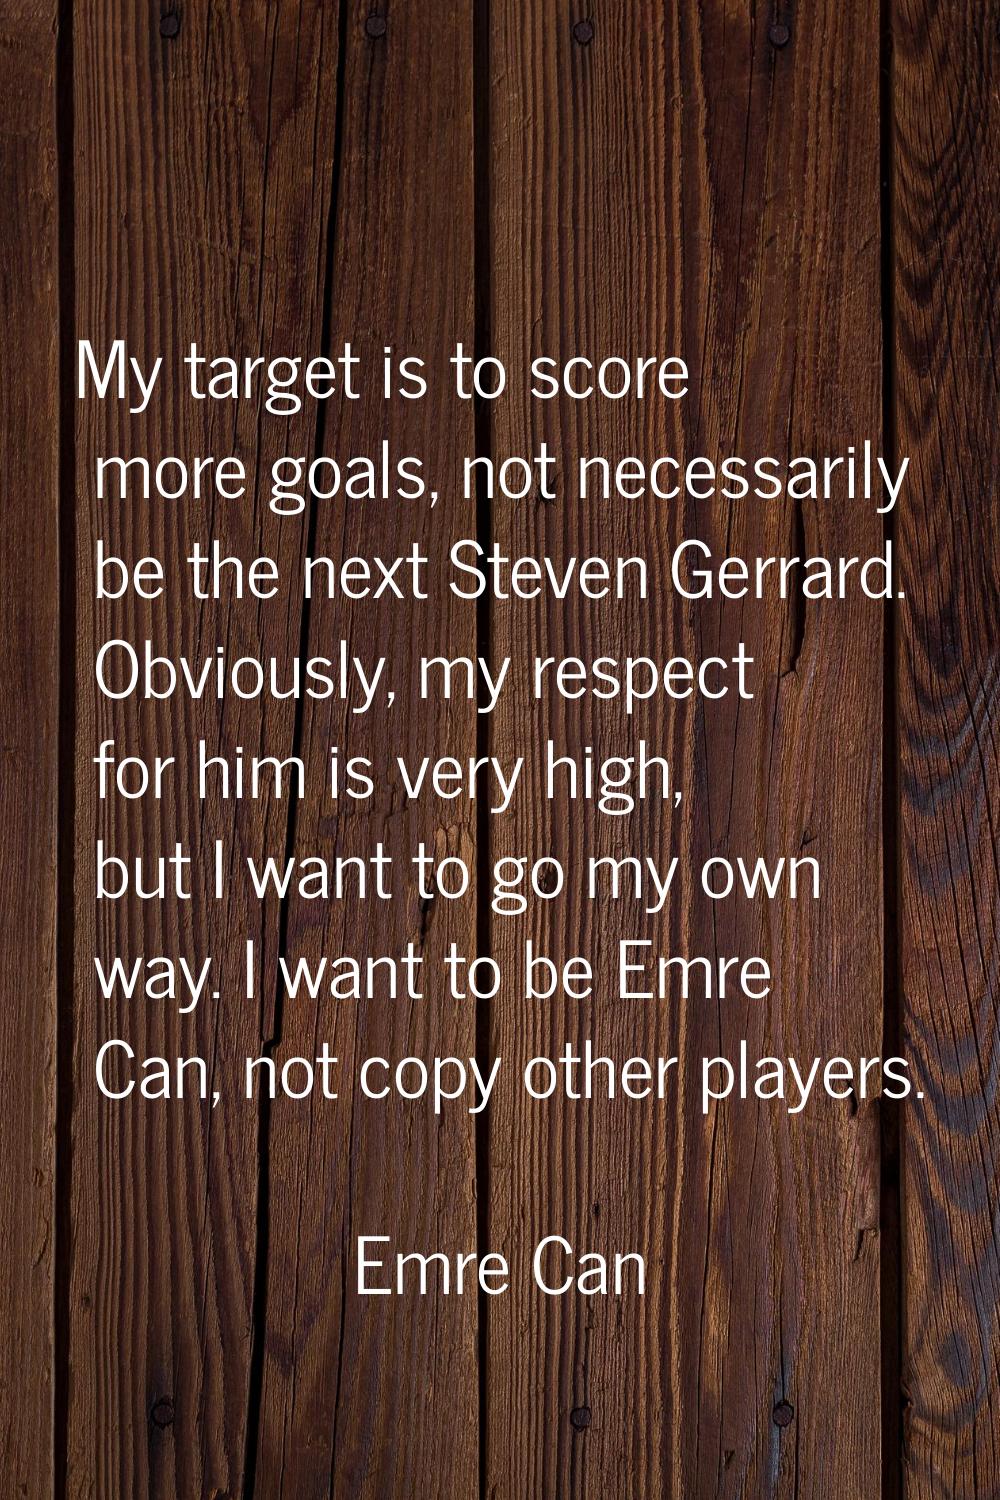 My target is to score more goals, not necessarily be the next Steven Gerrard. Obviously, my respect